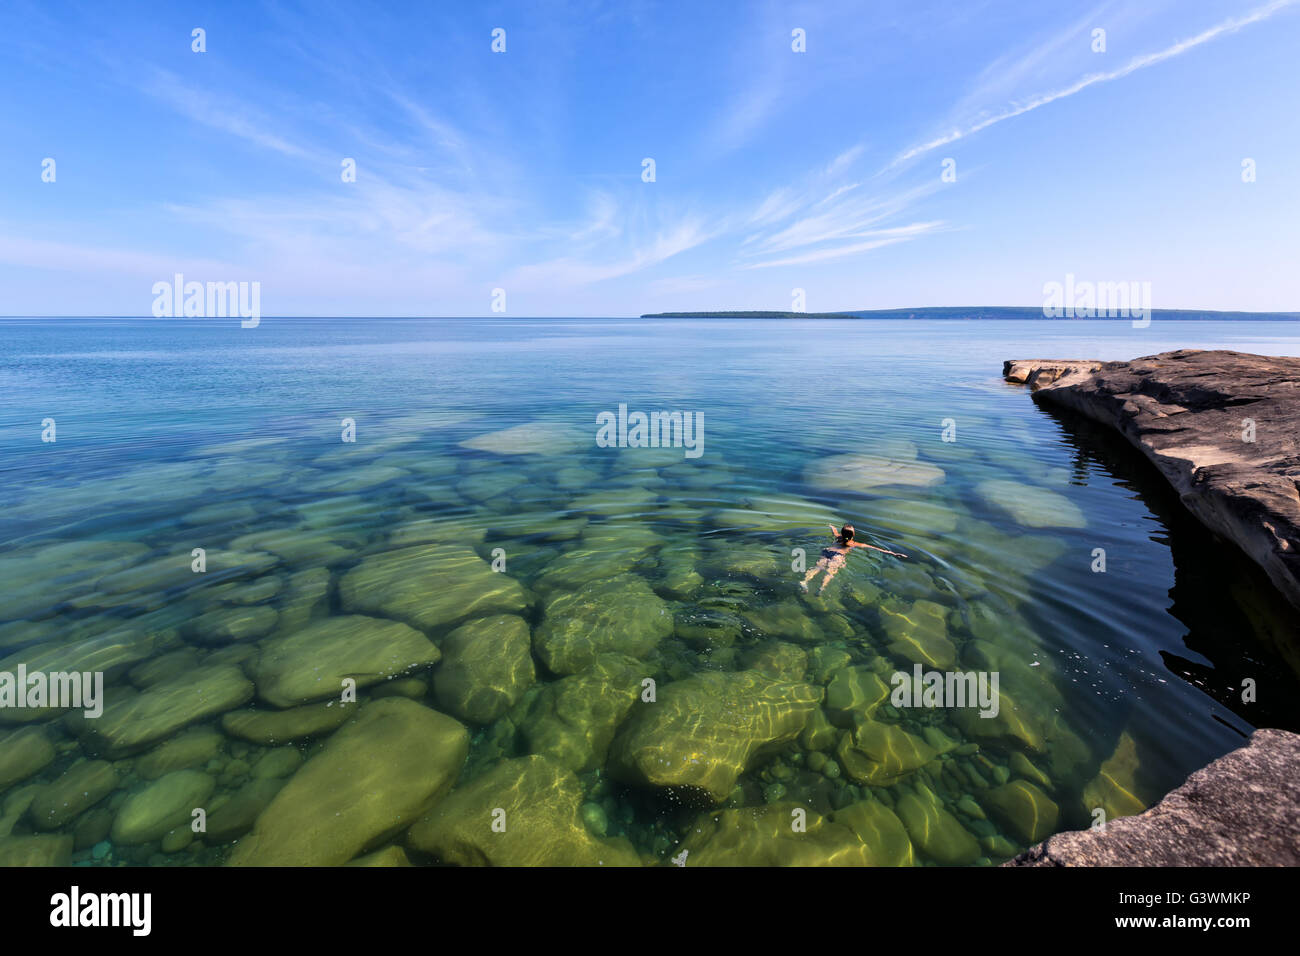 A girl swims in Lake Superior in the upper peninsula of Lake Michigan. Rocks are visible through the glass like, pristine waters Stock Photo